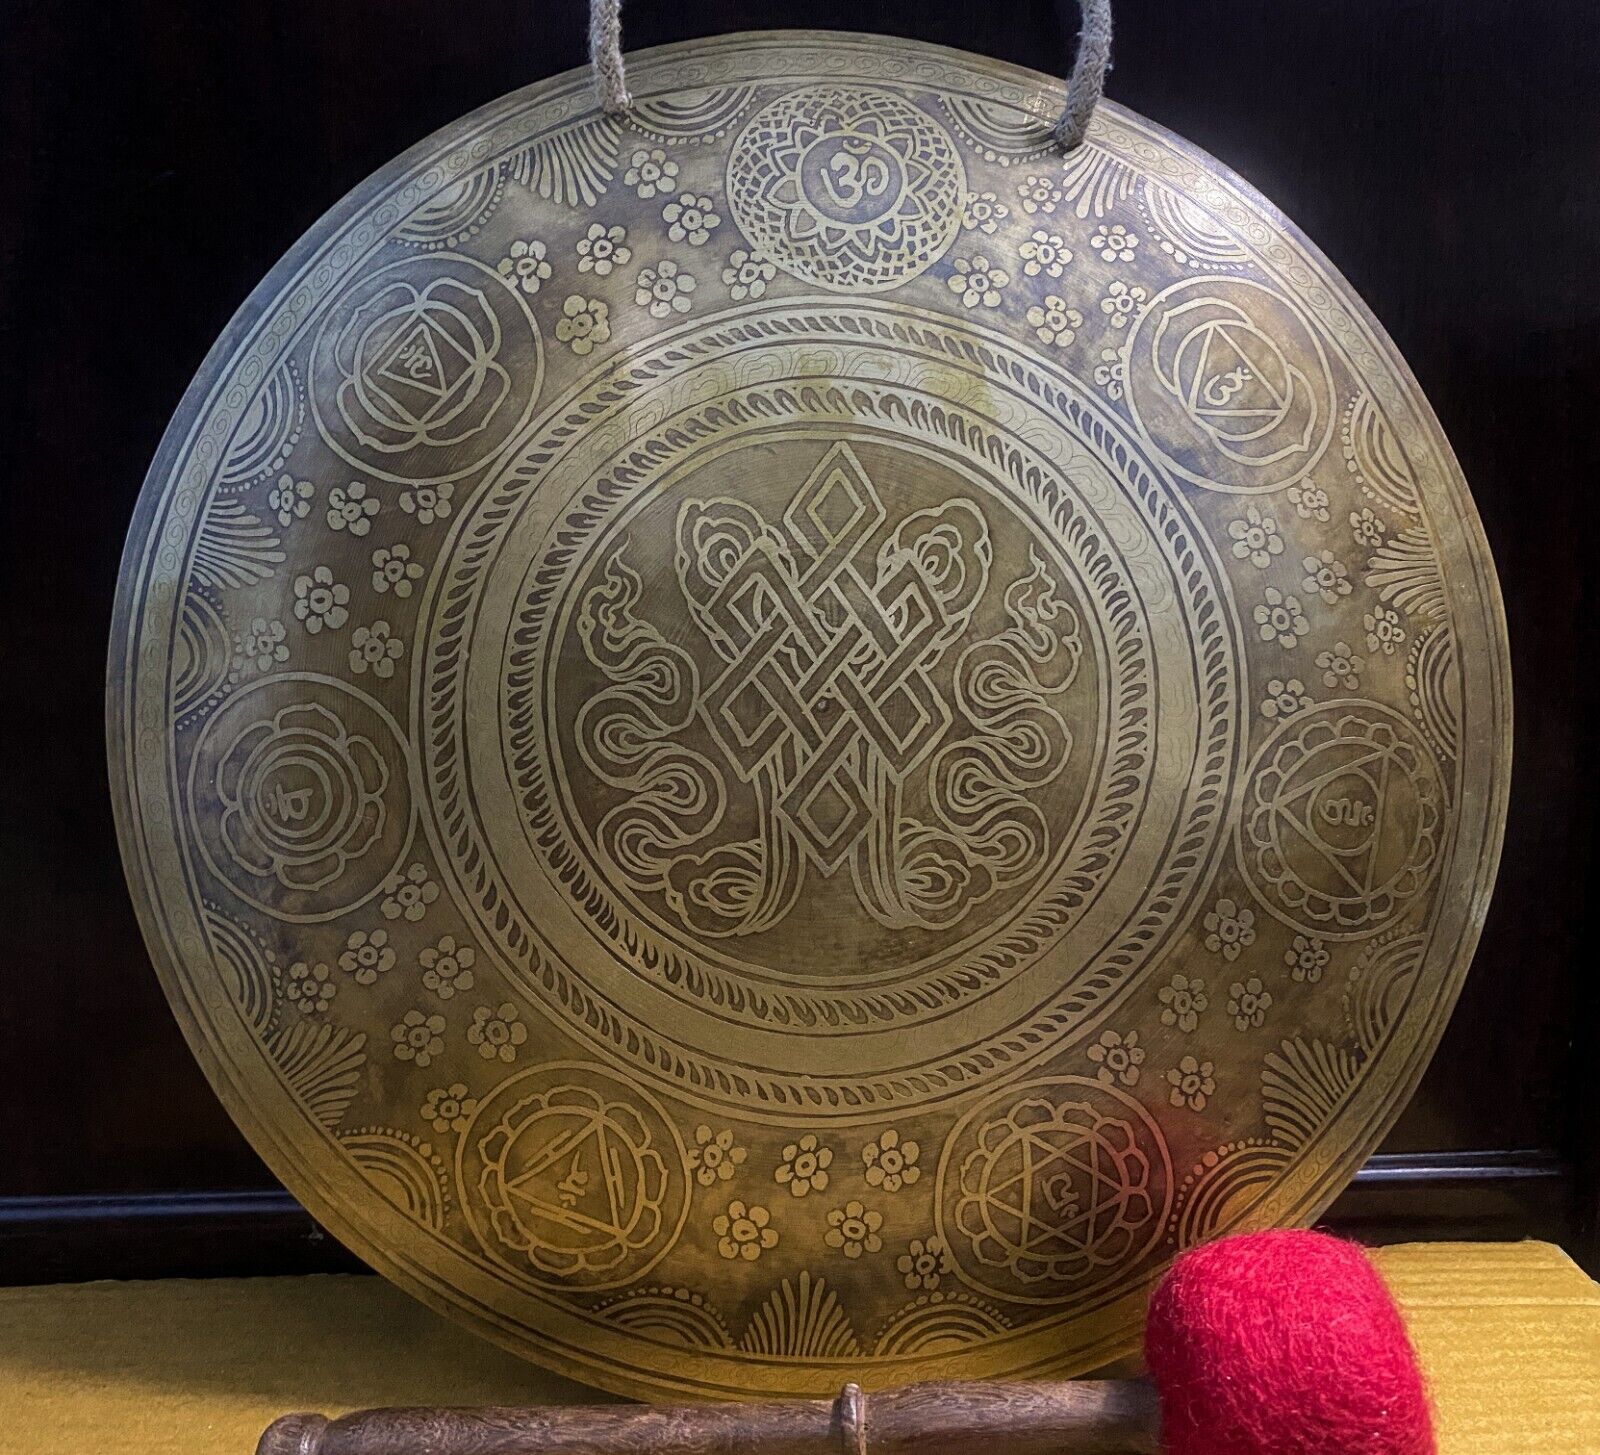 SALE 13 inches Special Mantra Carving Tibetan Gong from Nepal - Wind Gong